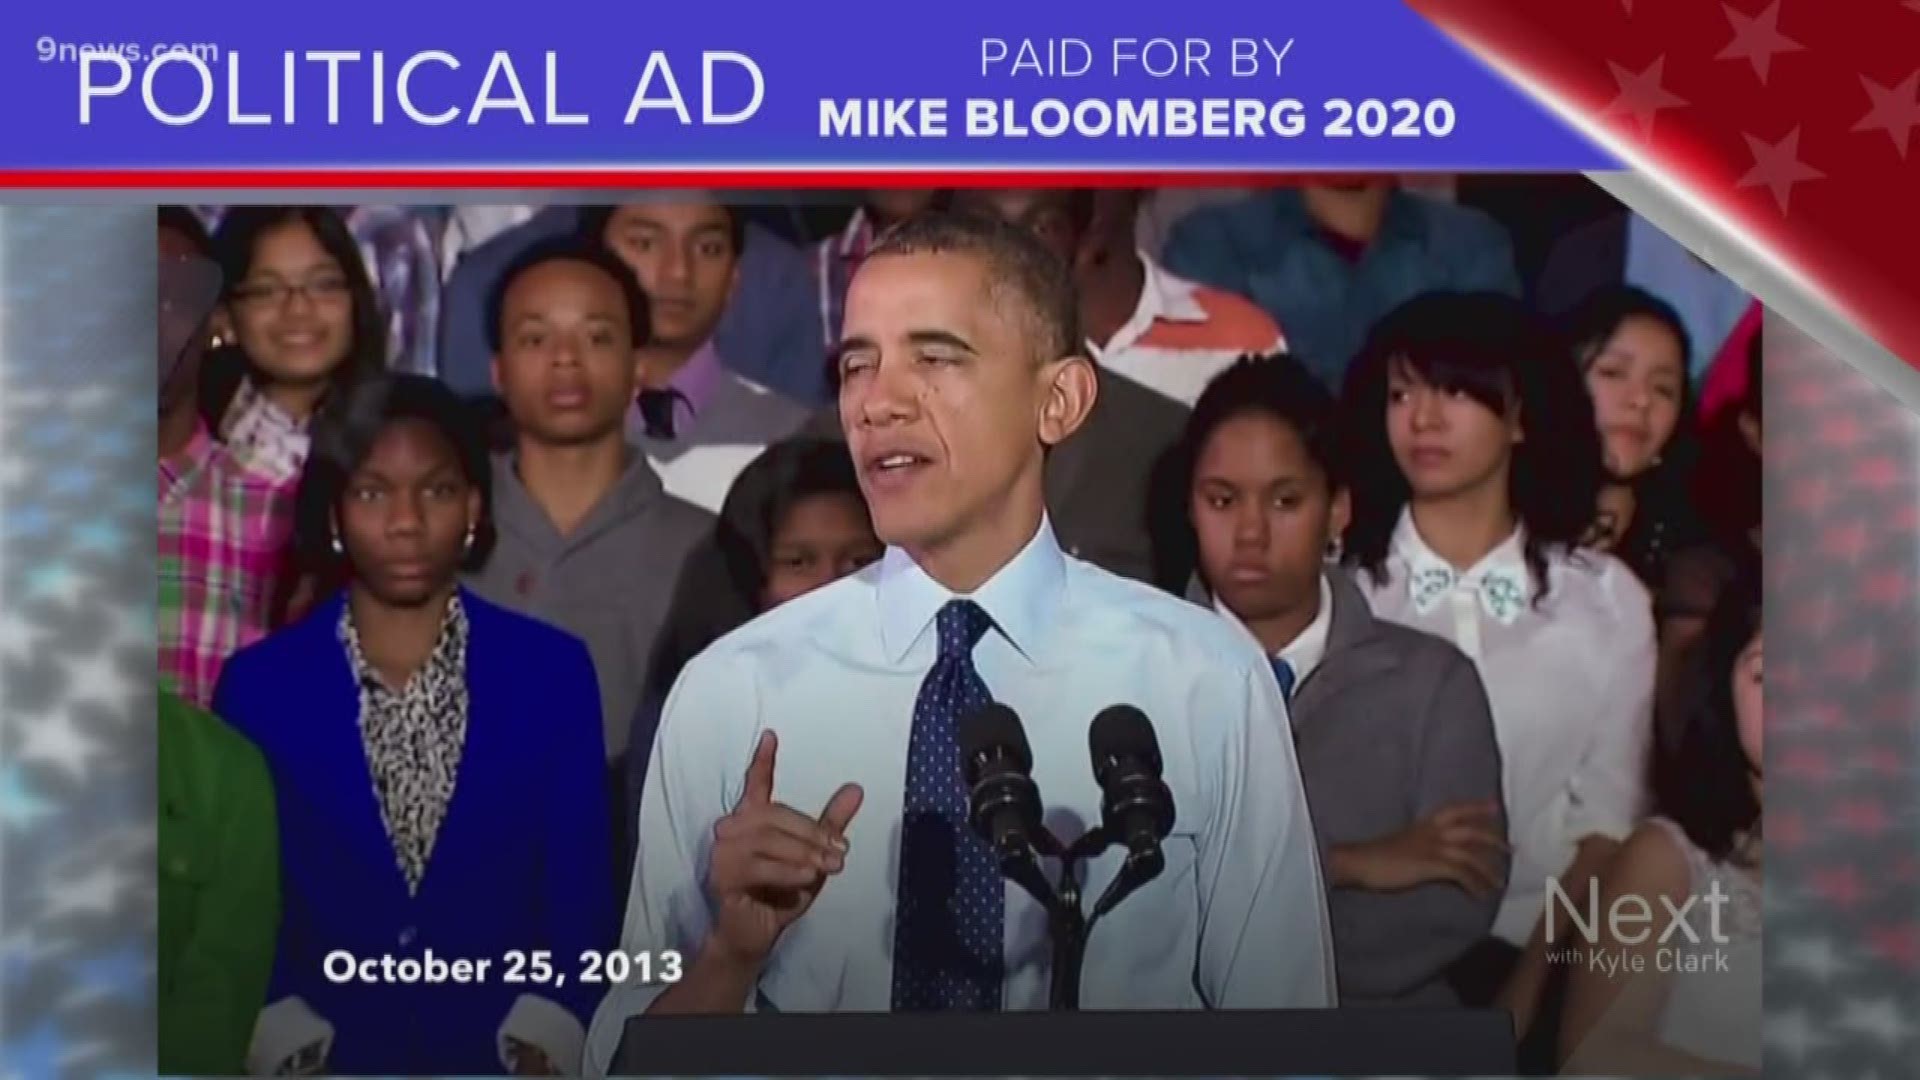 We reached out to Bloomberg's people in Colorado to see if the ad implies President Obama has endorsed him.